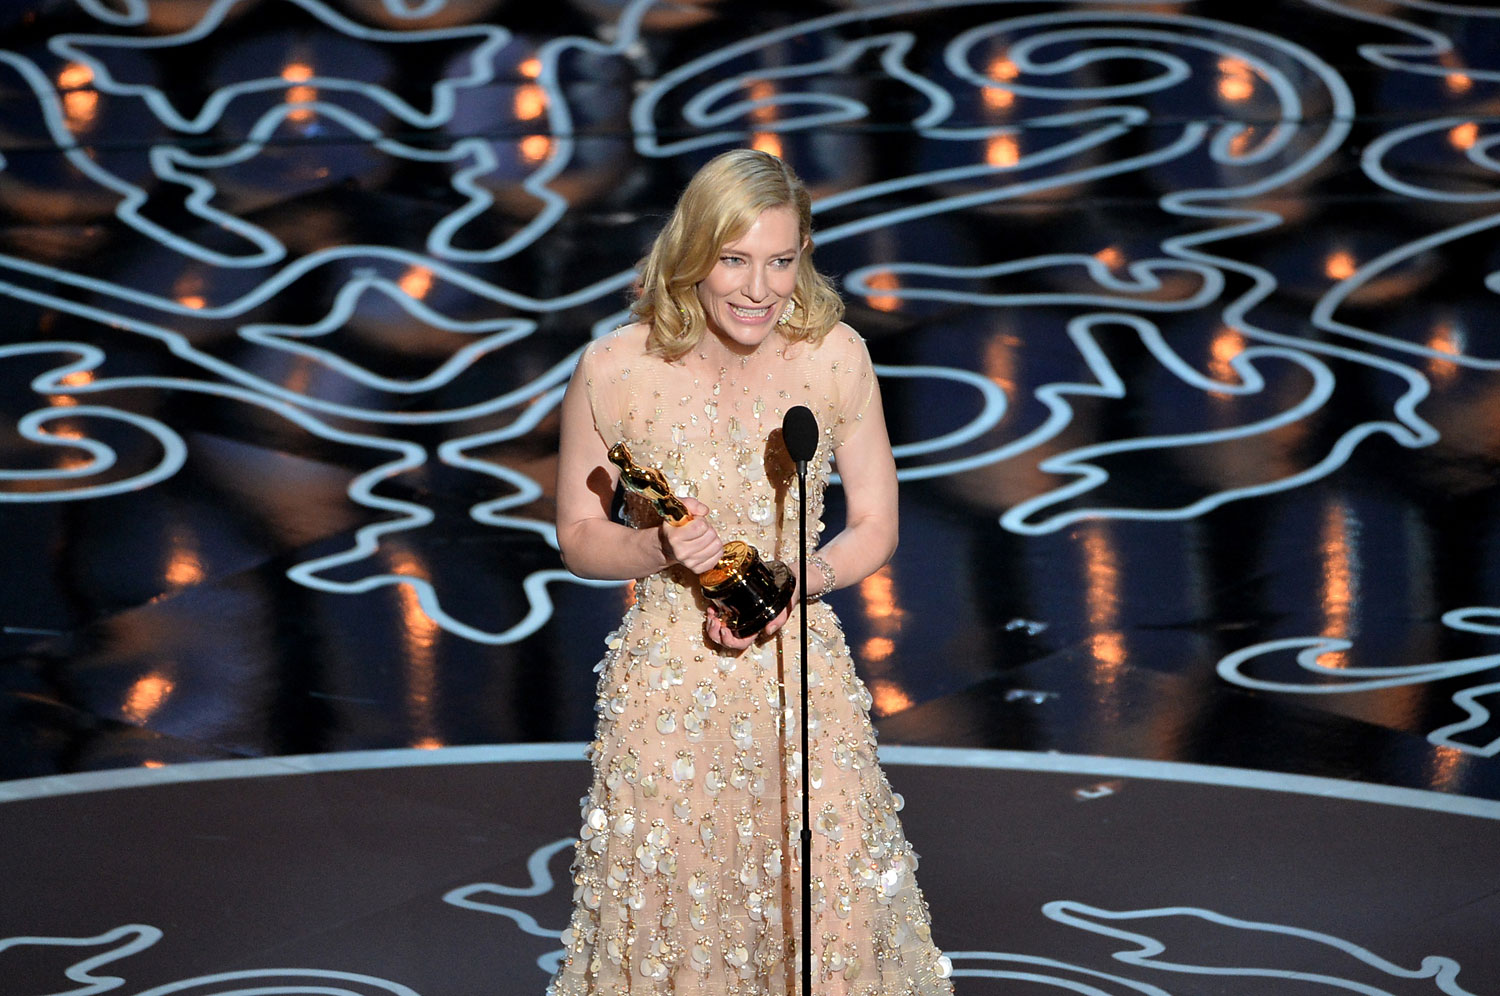 Actress Cate Blanchett accepts the Best Performance by an Actress in a Leading Role award for 'Blue Jasmine' onstage during the Oscars at the Dolby Theatre on March 2, 2014 in Hollywood, California (Kevin Winter—Getty Images)